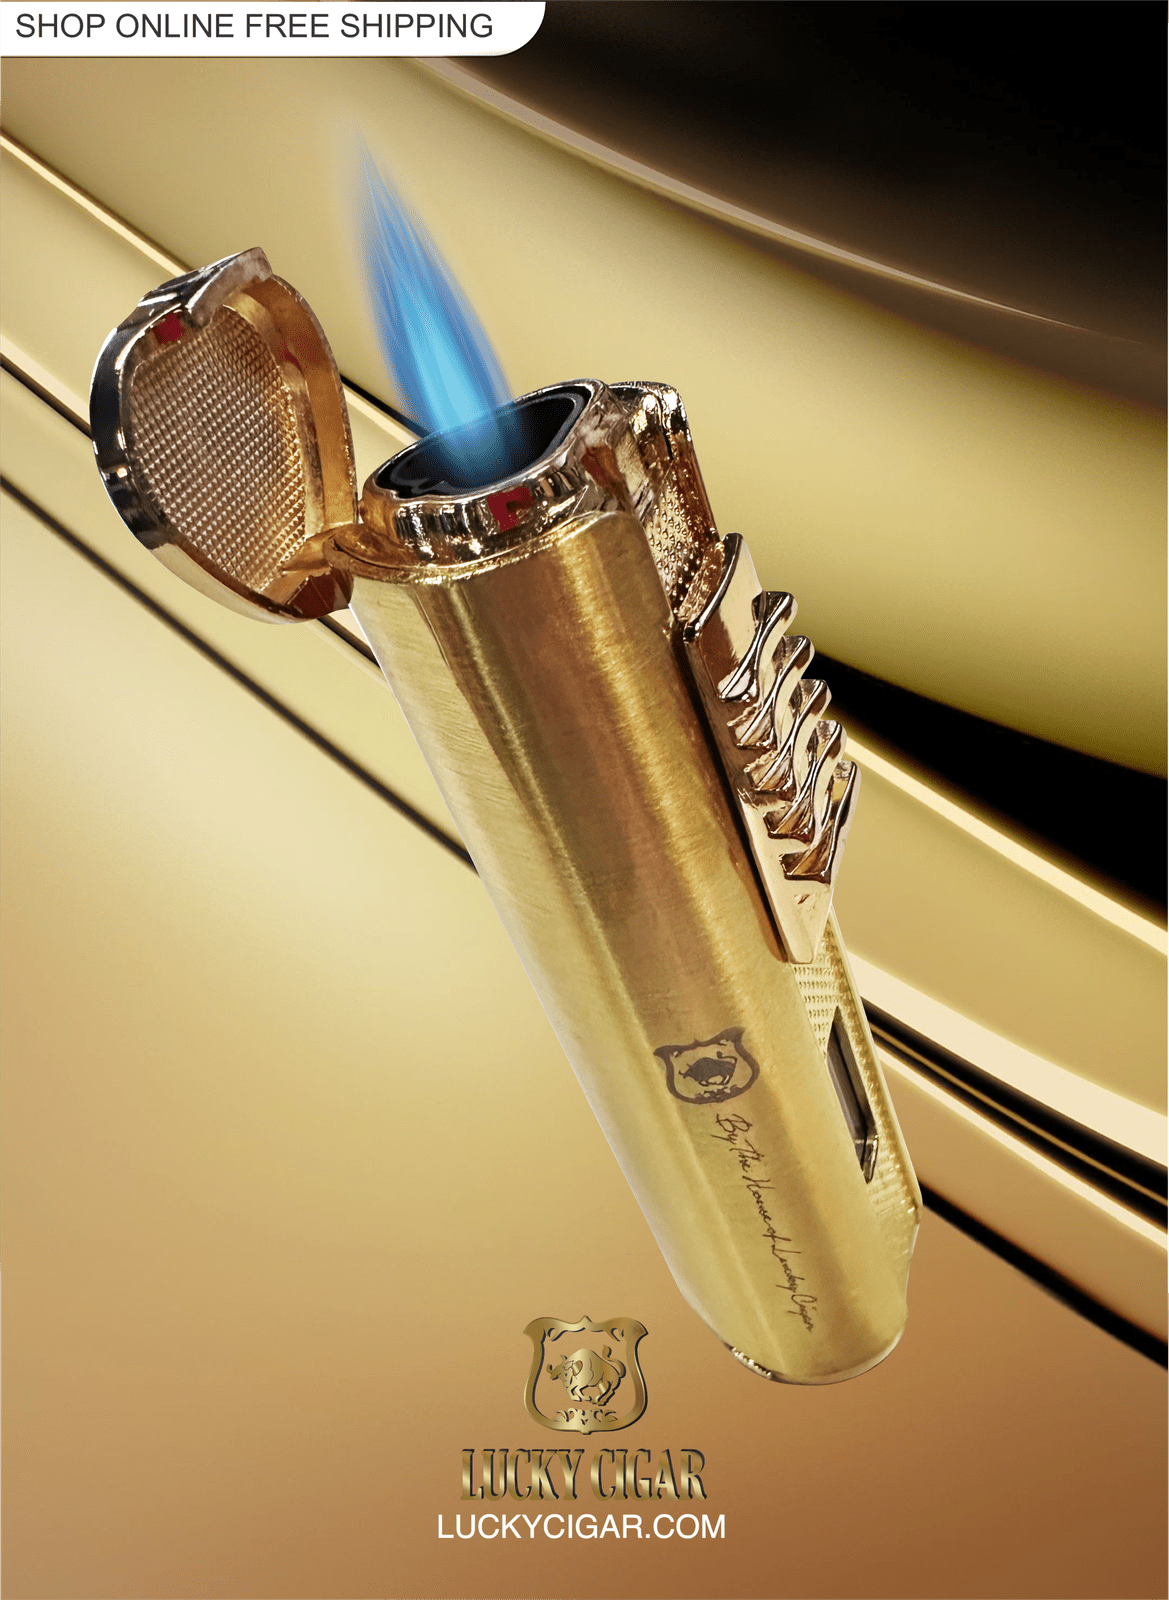 Cigar Lifestyle Accessories: Torch Lighter in Gold